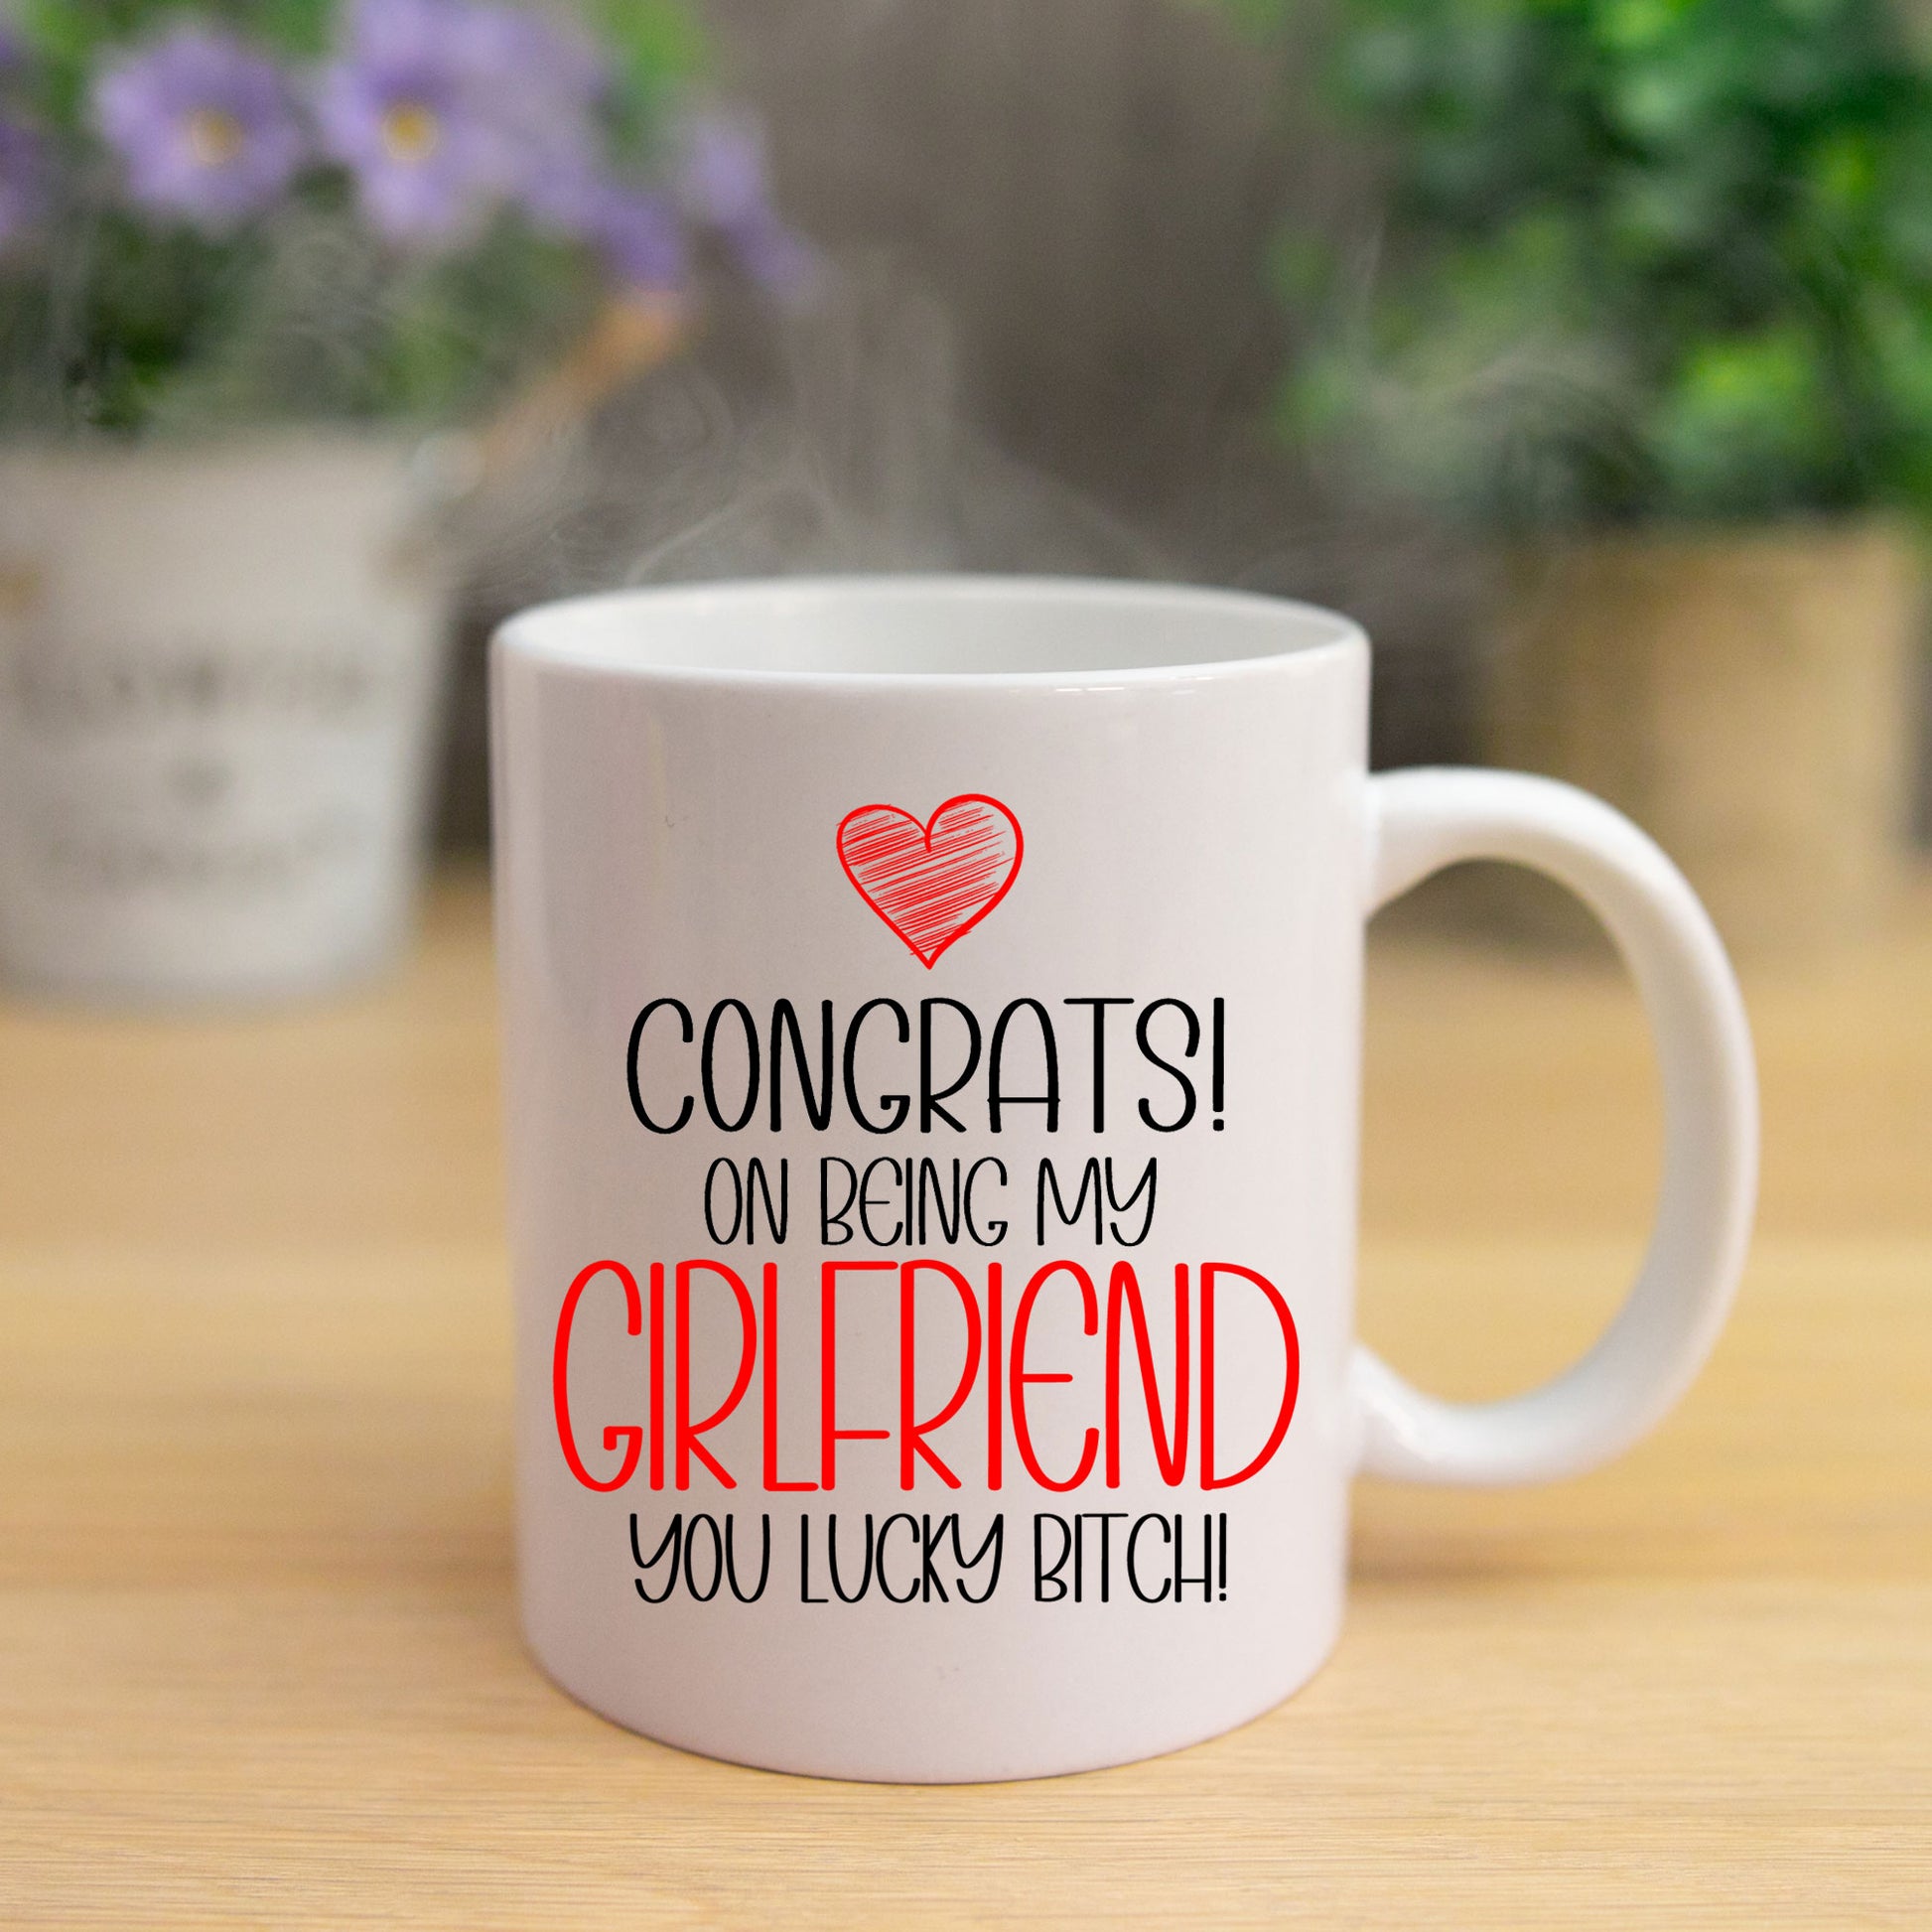 Congrats On Being My Girlfriend Mug and/or Coaster Gift  - Always Looking Good - Lucky Bitch Mug On Its Own  